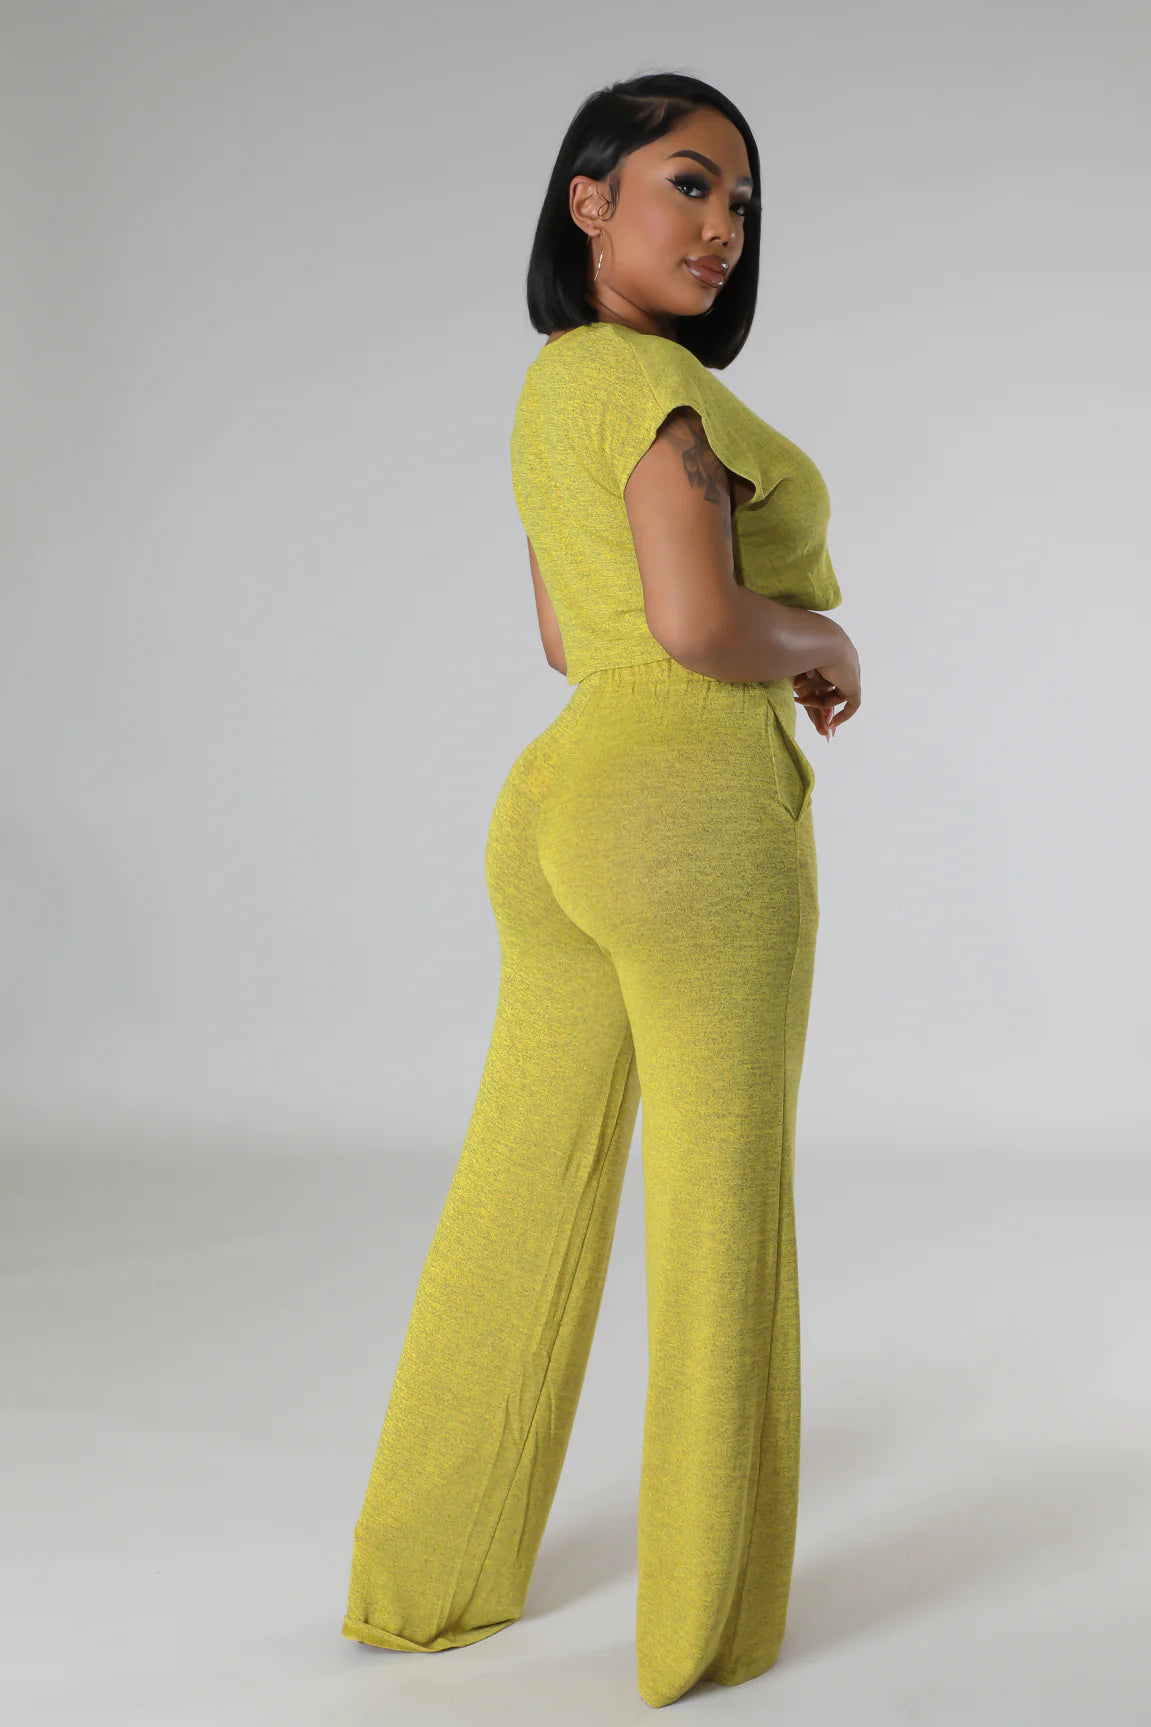 Southern Comfort Pant Set Yellow - Ali’s Couture 